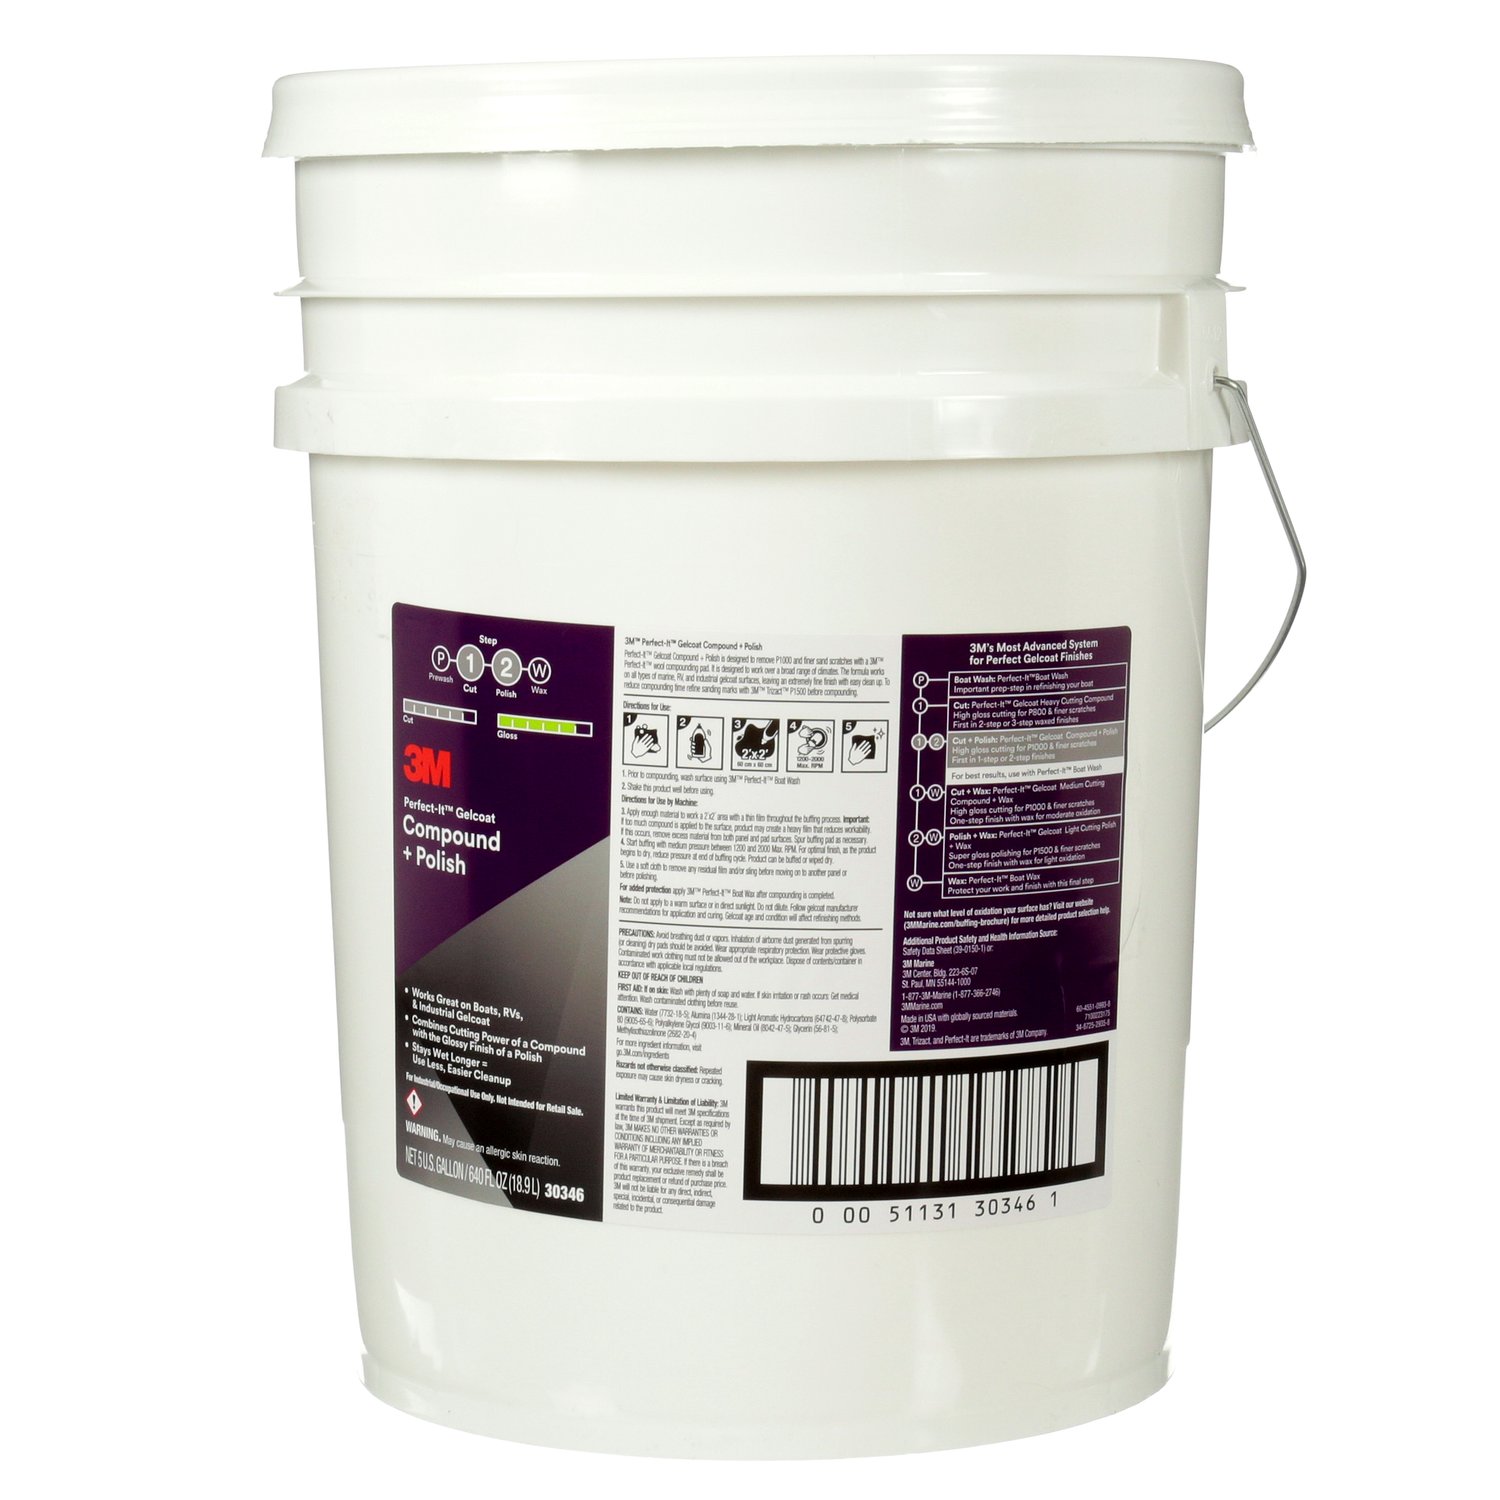 7100223175 - 3M Perfect-It Gelcoat Compound + Polish 30346, 5 gal (18.9 liters,
21.64 Kg/48.18 lbs), 1/Case